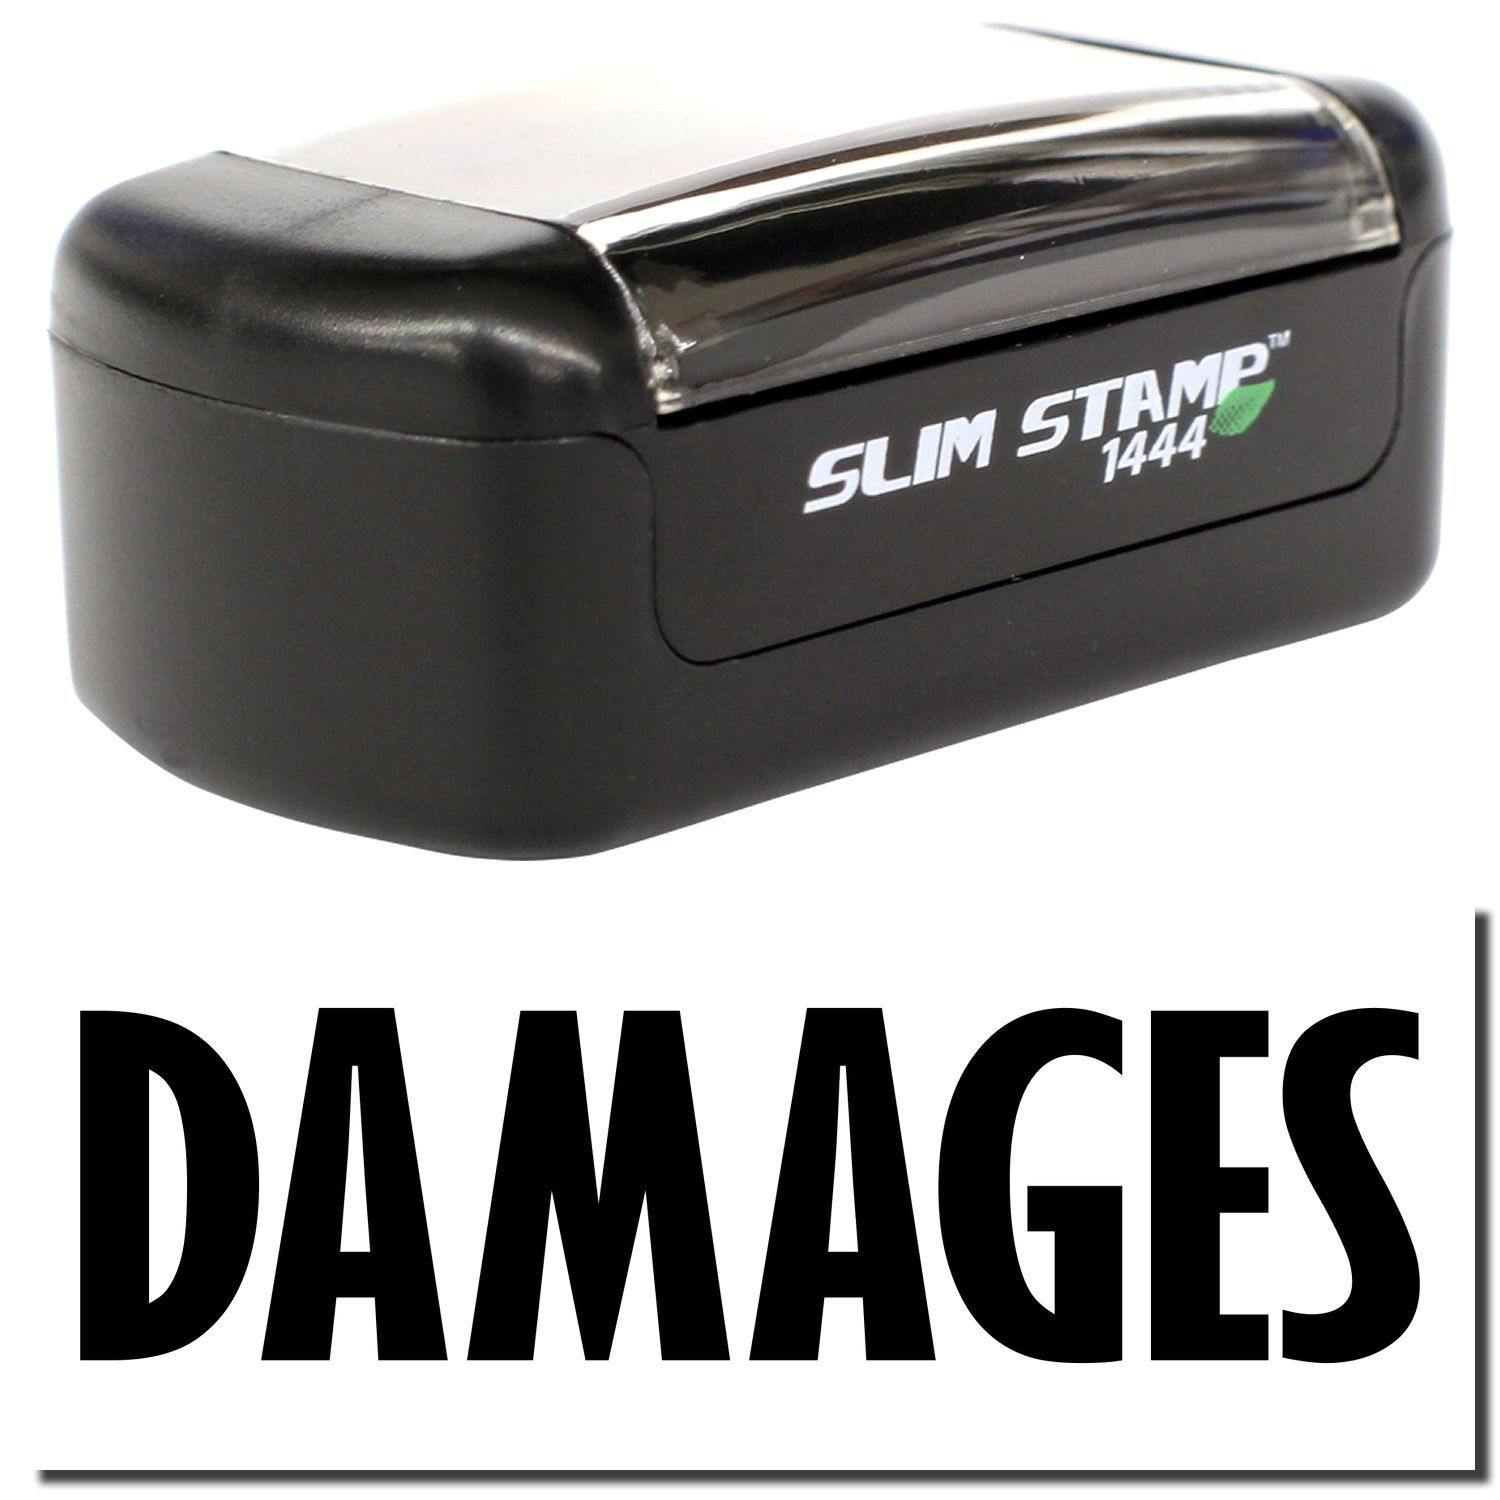 A stock office pre-inked stamp with a stamped image showing how the text "DAMAGES" is displayed after stamping.